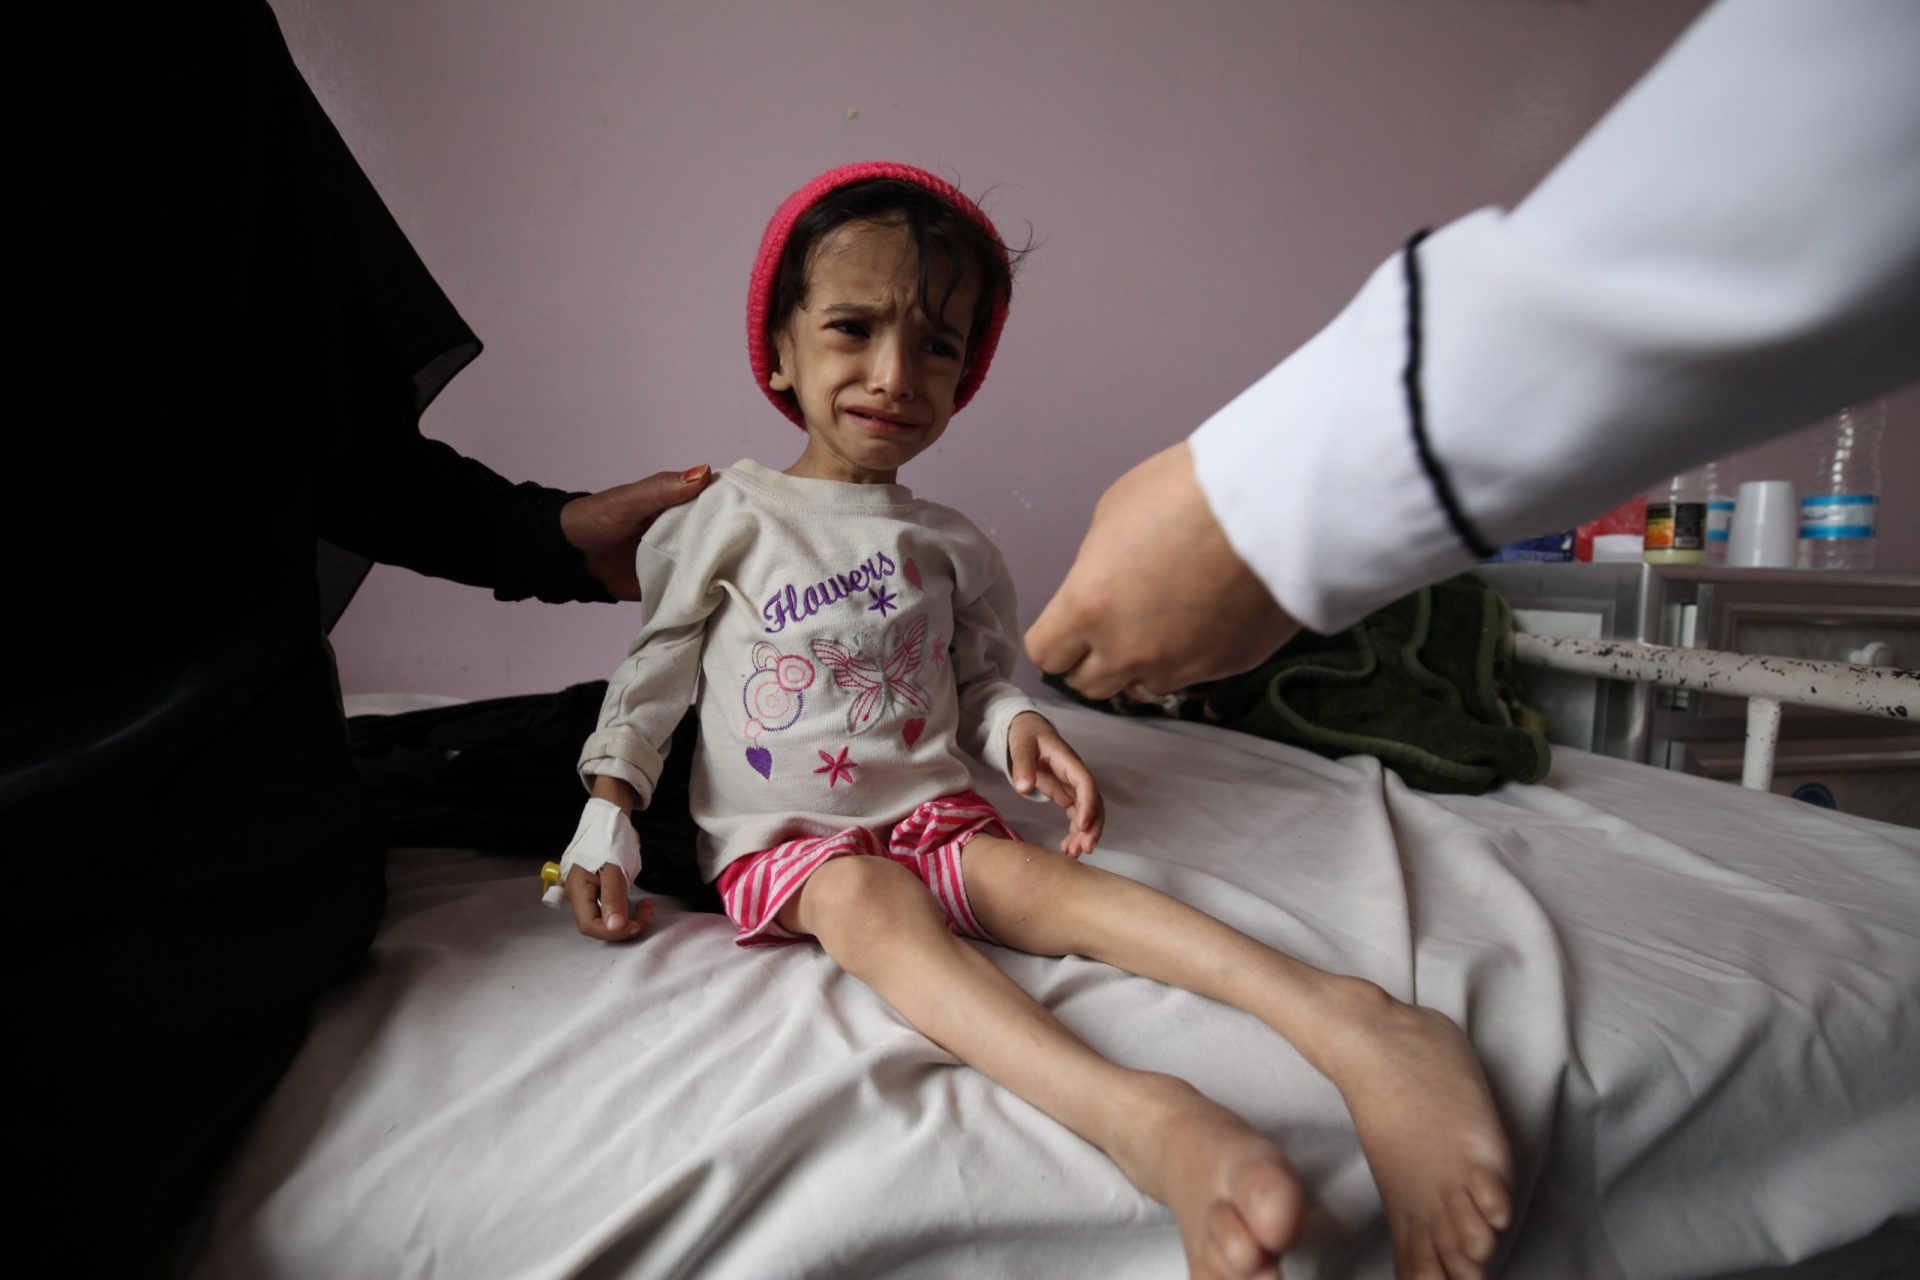 On 30 July 2015, Ali Hanadi Hussein, 2 years and 8 months old, and weighs a paltry 7 kilograms. She is malnourished, weak and can’t walk. She is admitted at Sabeen hospital in Yemen’s capital, Sana’a for treatment. Ali Hanadi Hussein is 2 years and 8 months old, and weighs a paltry 7 kilograms now. She is malnourished, weak and can’t walk. Her mother says since the war escalated the family mainly survived on bread whenever they find it. Hanadi and her three siblings started to become frail. Then Hanadi got diarhoea and started vomiting. Her father is permanently disabled due to an accident at work and her mother, only a housewife, couldn’t find any source of food. They survived on handouts from neighbours and charity groups. When Hanadi’s condition worsened, she decided to bring her to Sabeen hospital but left the other three older children in the village with their father.
“It is already very hard for us especially with my husband’s condition, living on charity every day, now I’m here alone with my daughter while the country is on fire. Though at Al-Sabeen Hospital we have someone who can help her, I am worried about the children and family I left behind” – Hanadi’s mother said.